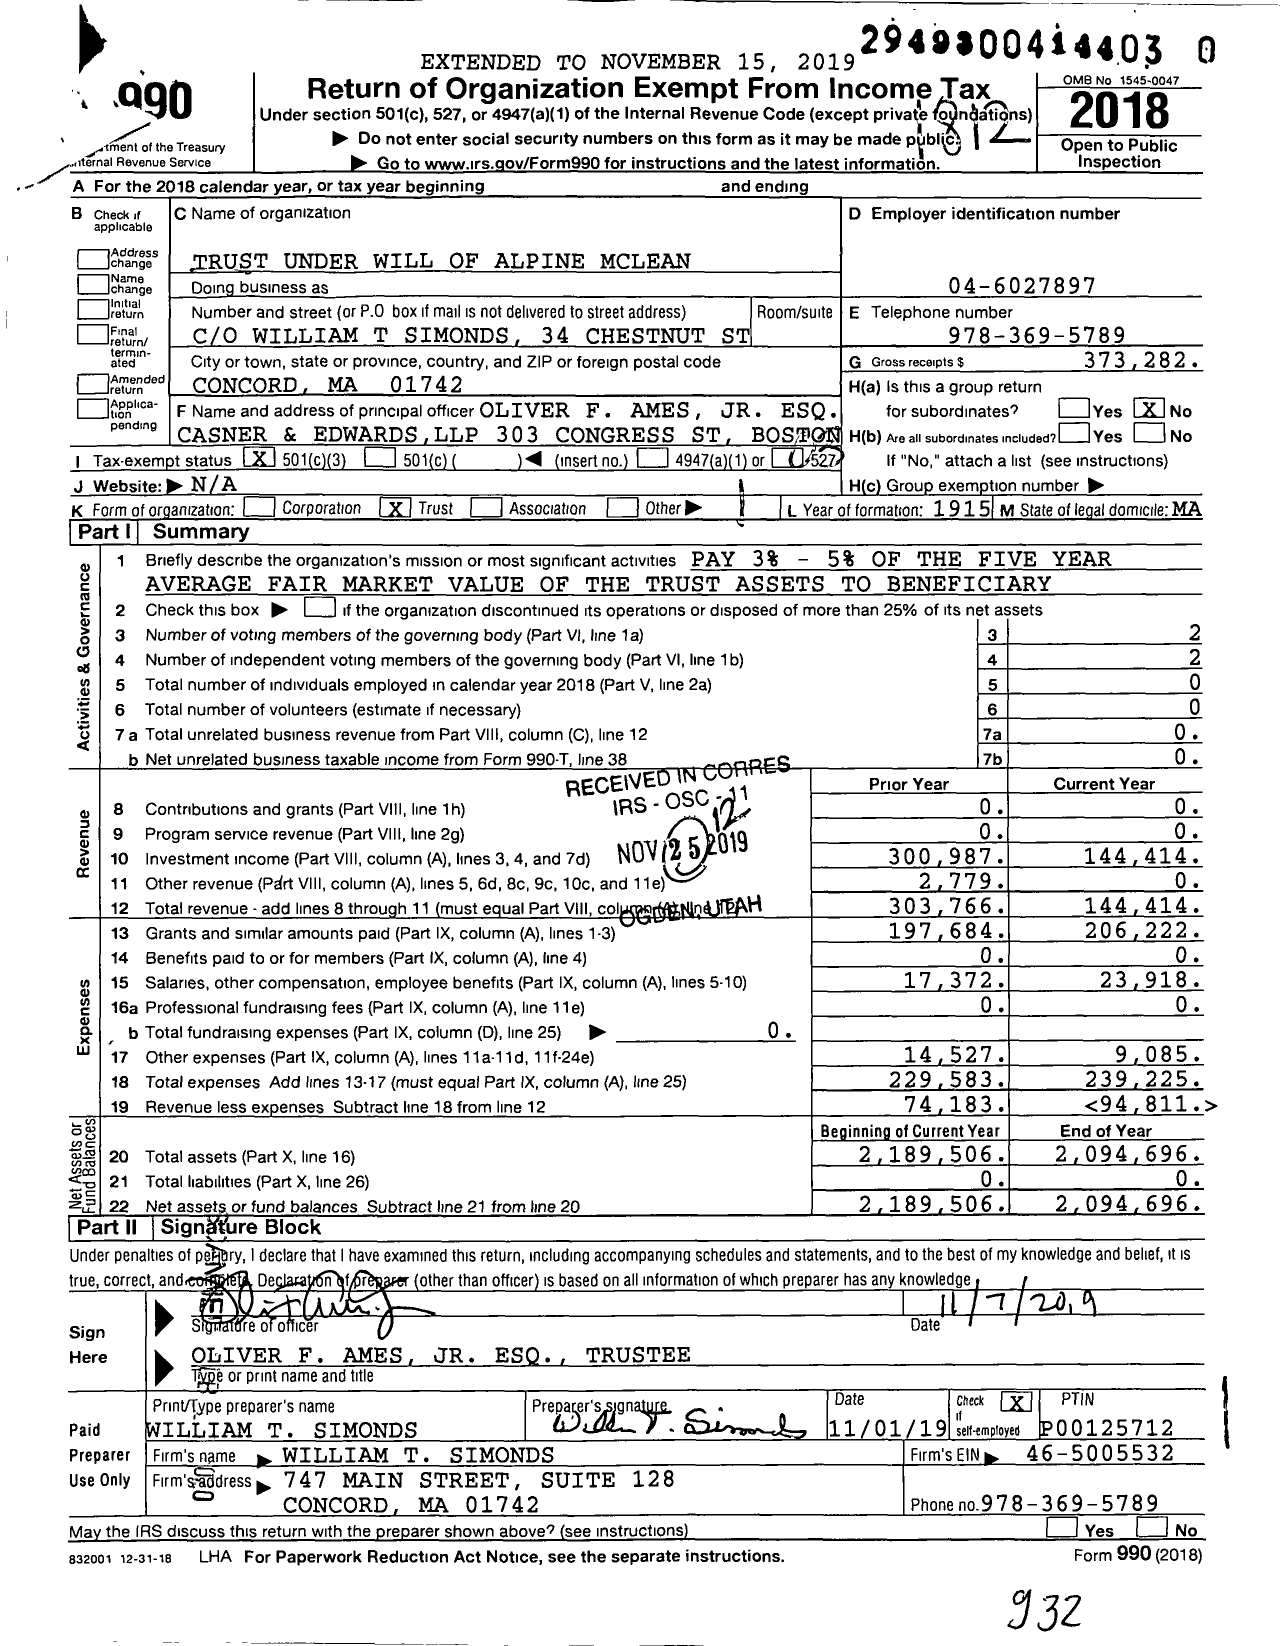 Image of first page of 2018 Form 990 for Trust Under Will of Alpine Mclean